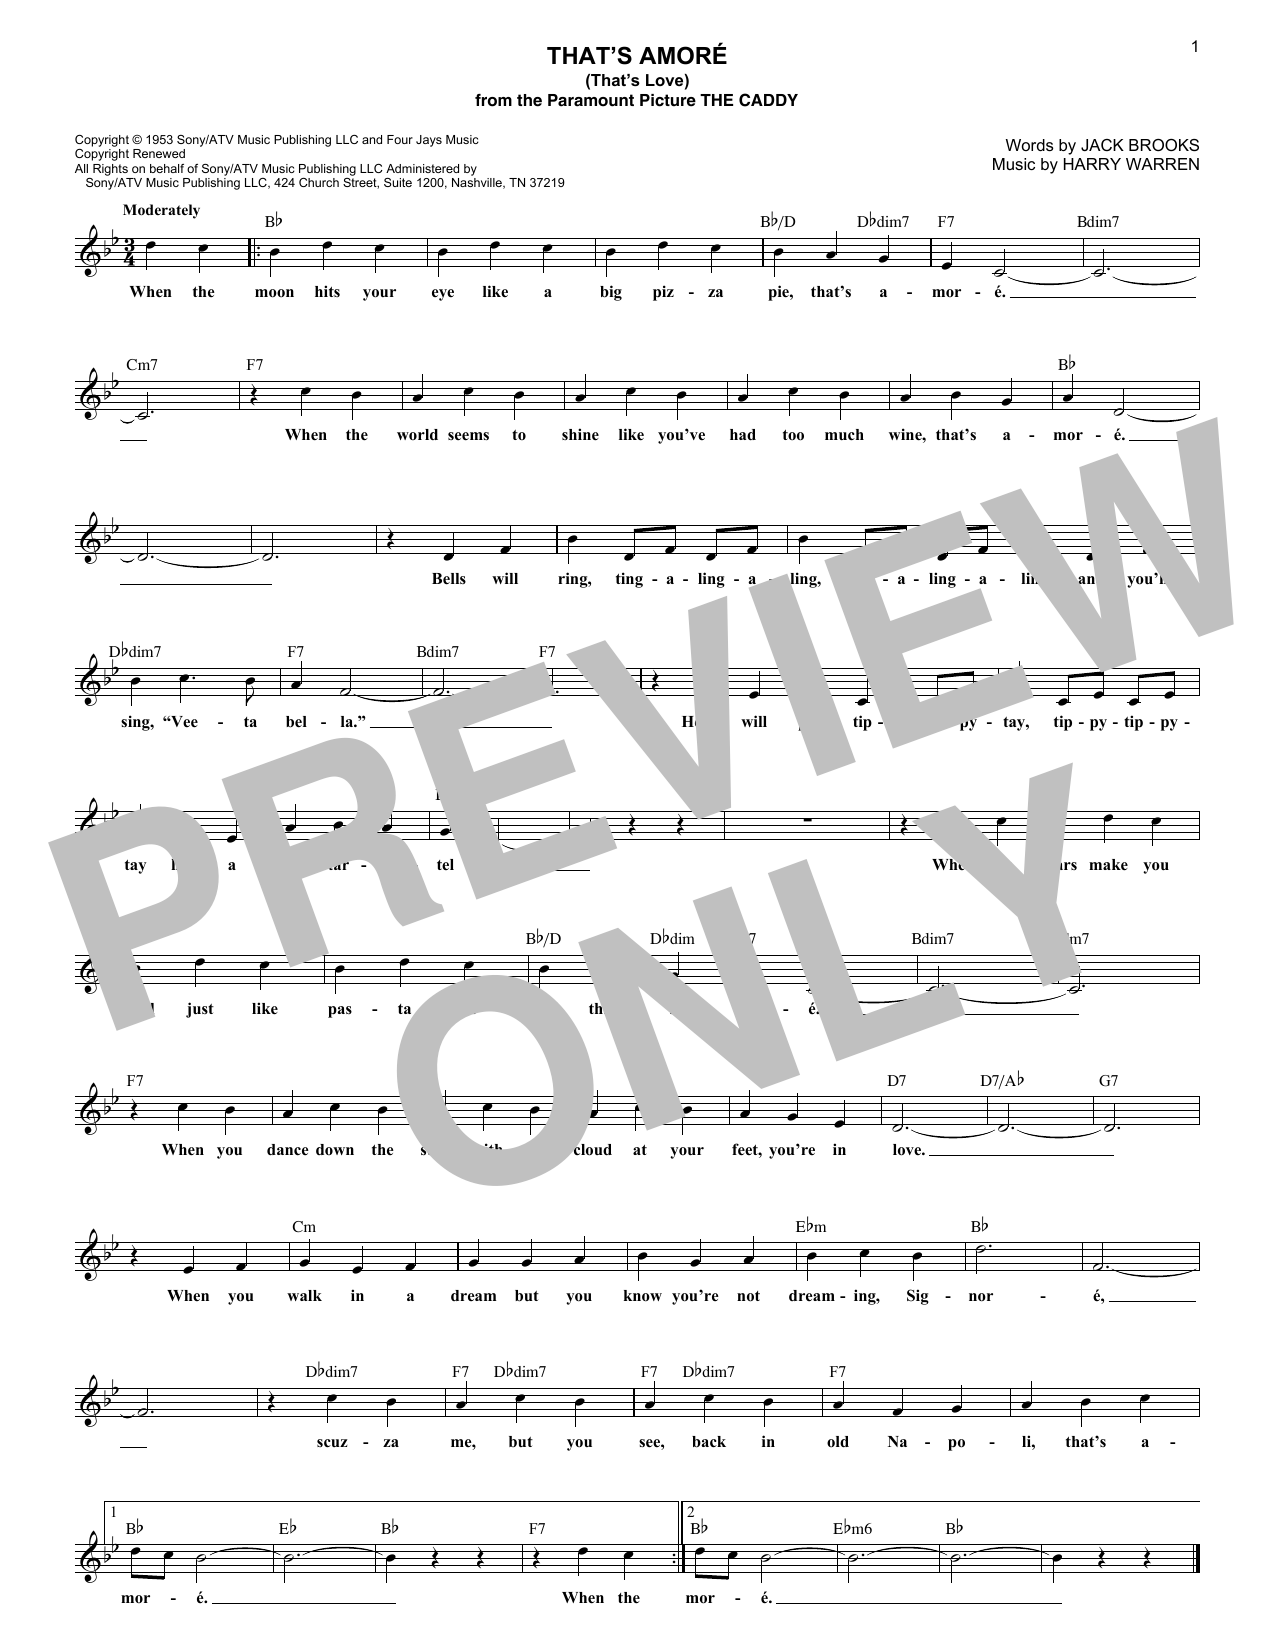 Download Harry Warren That's Amore (That's Love) Sheet Music